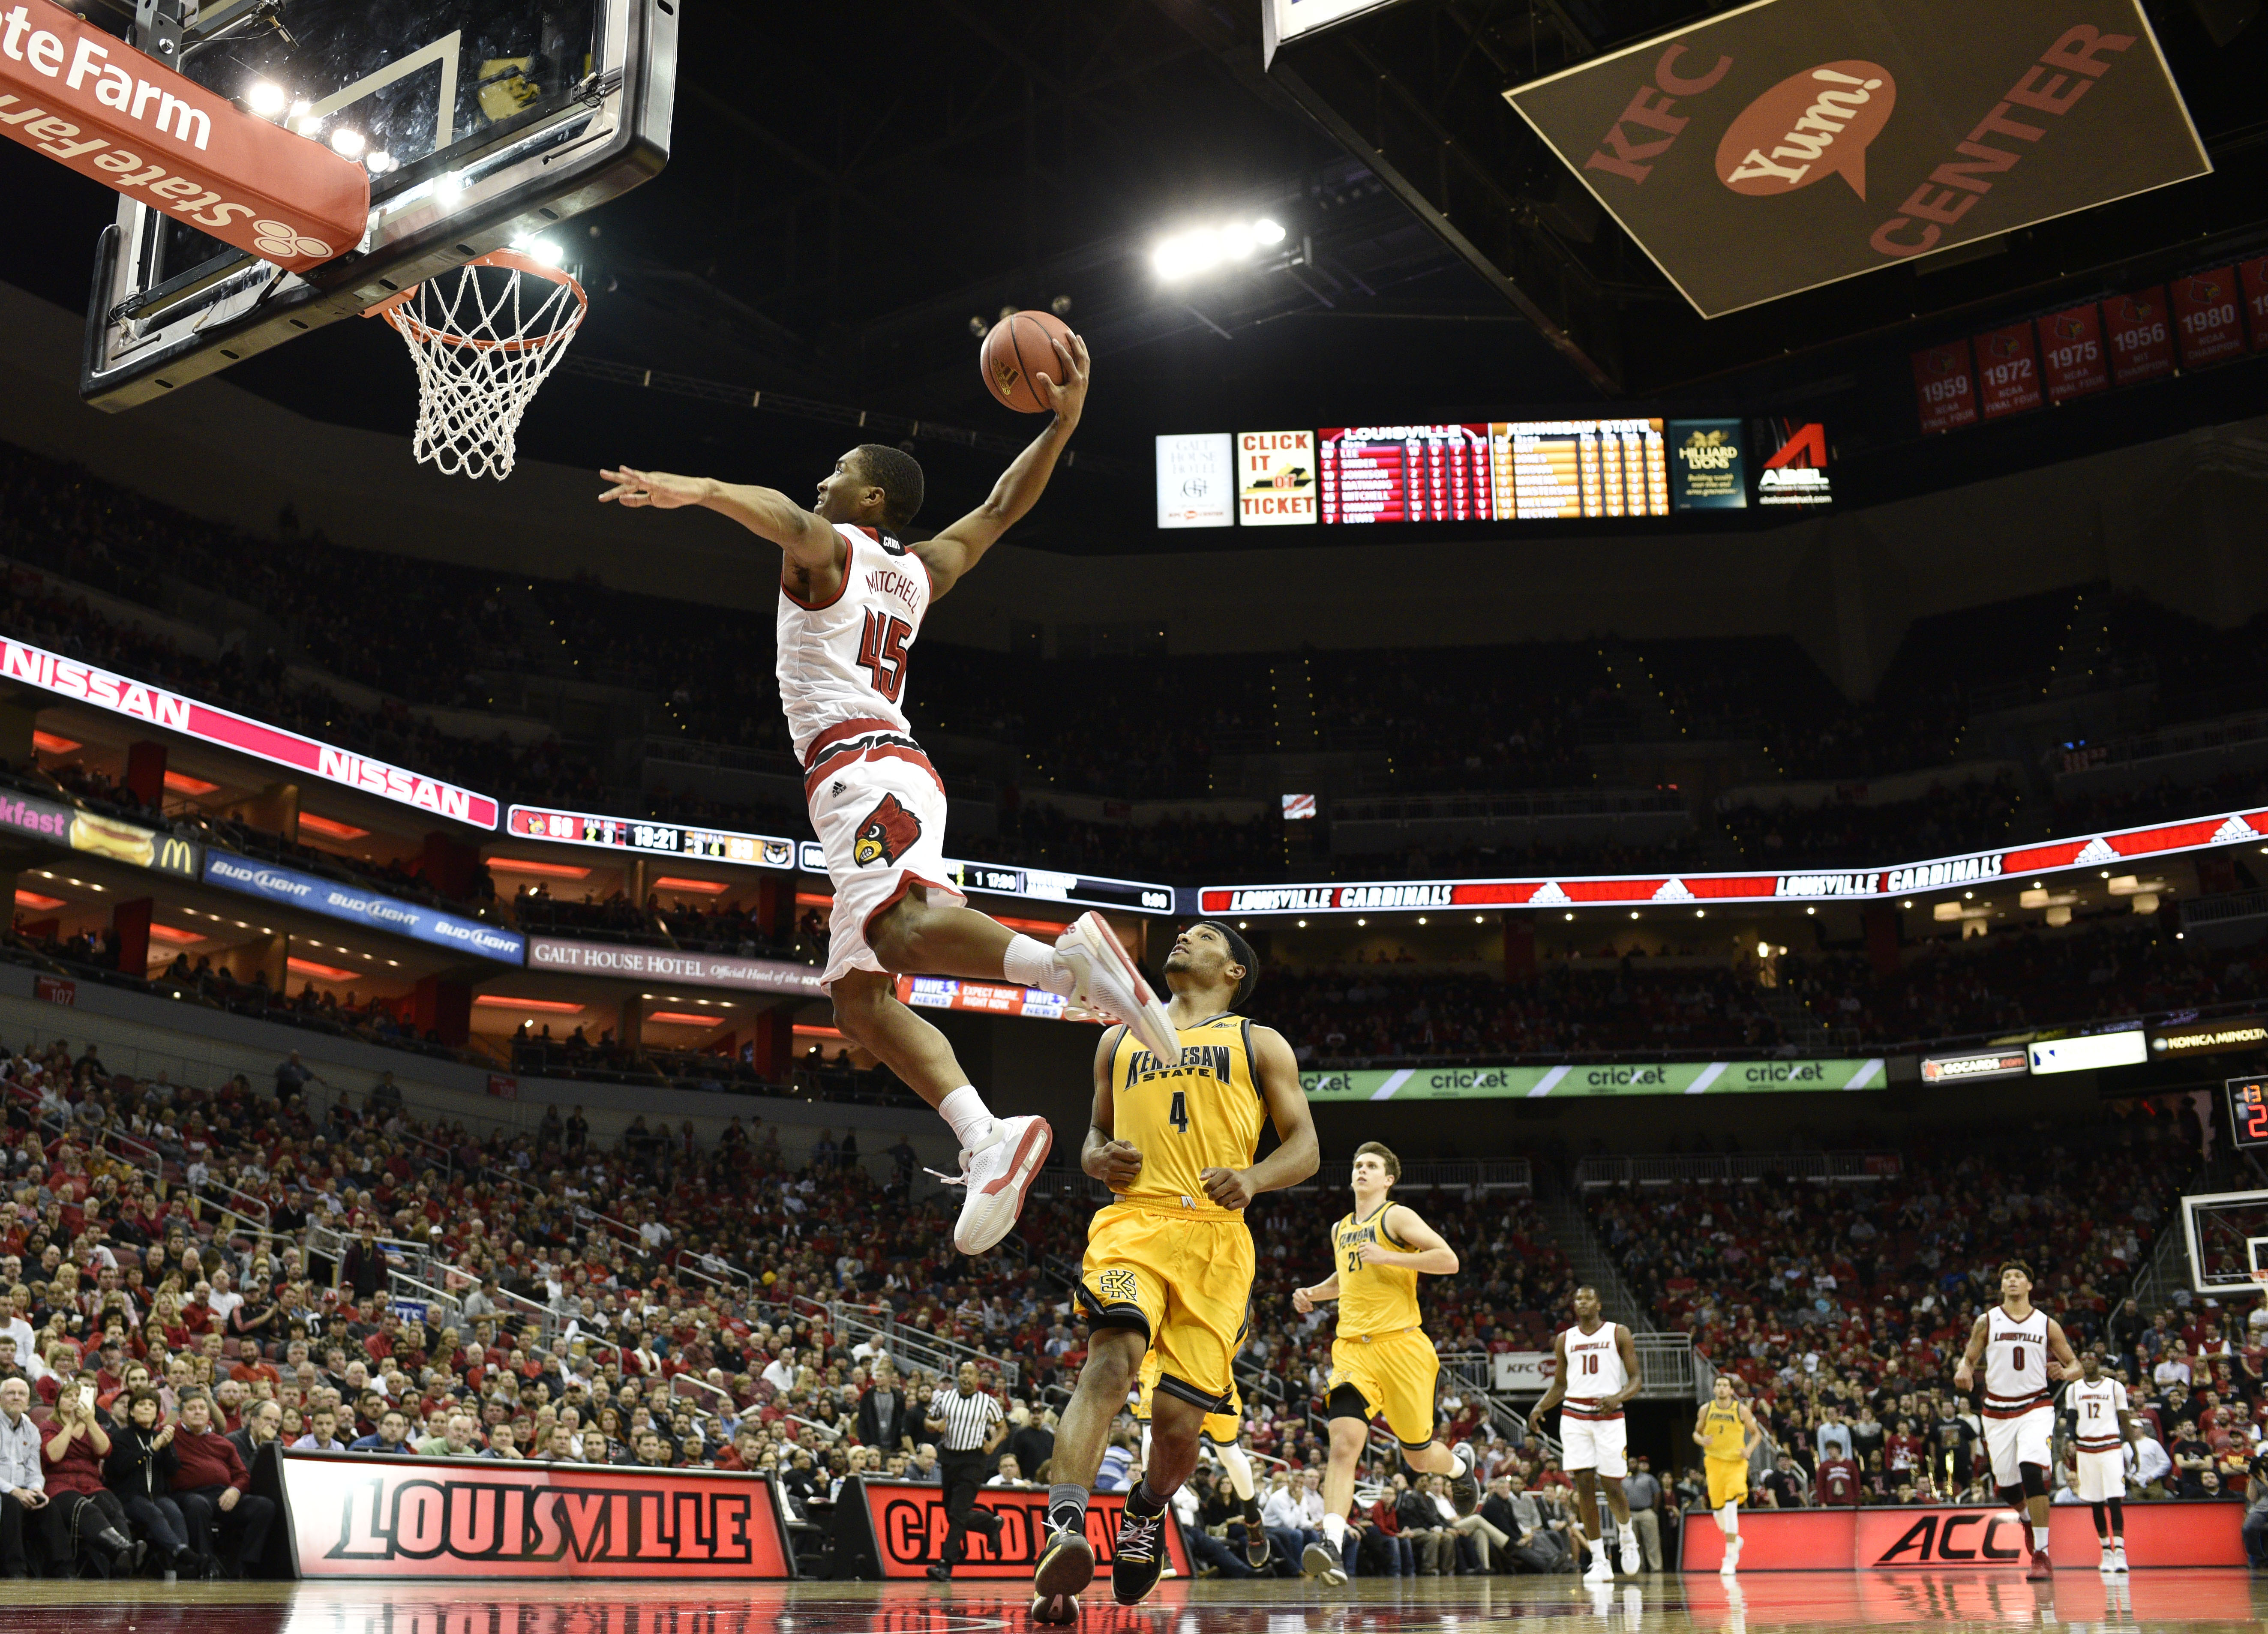 Louisville guard Donovan Mitchell's putback slam reminds us that